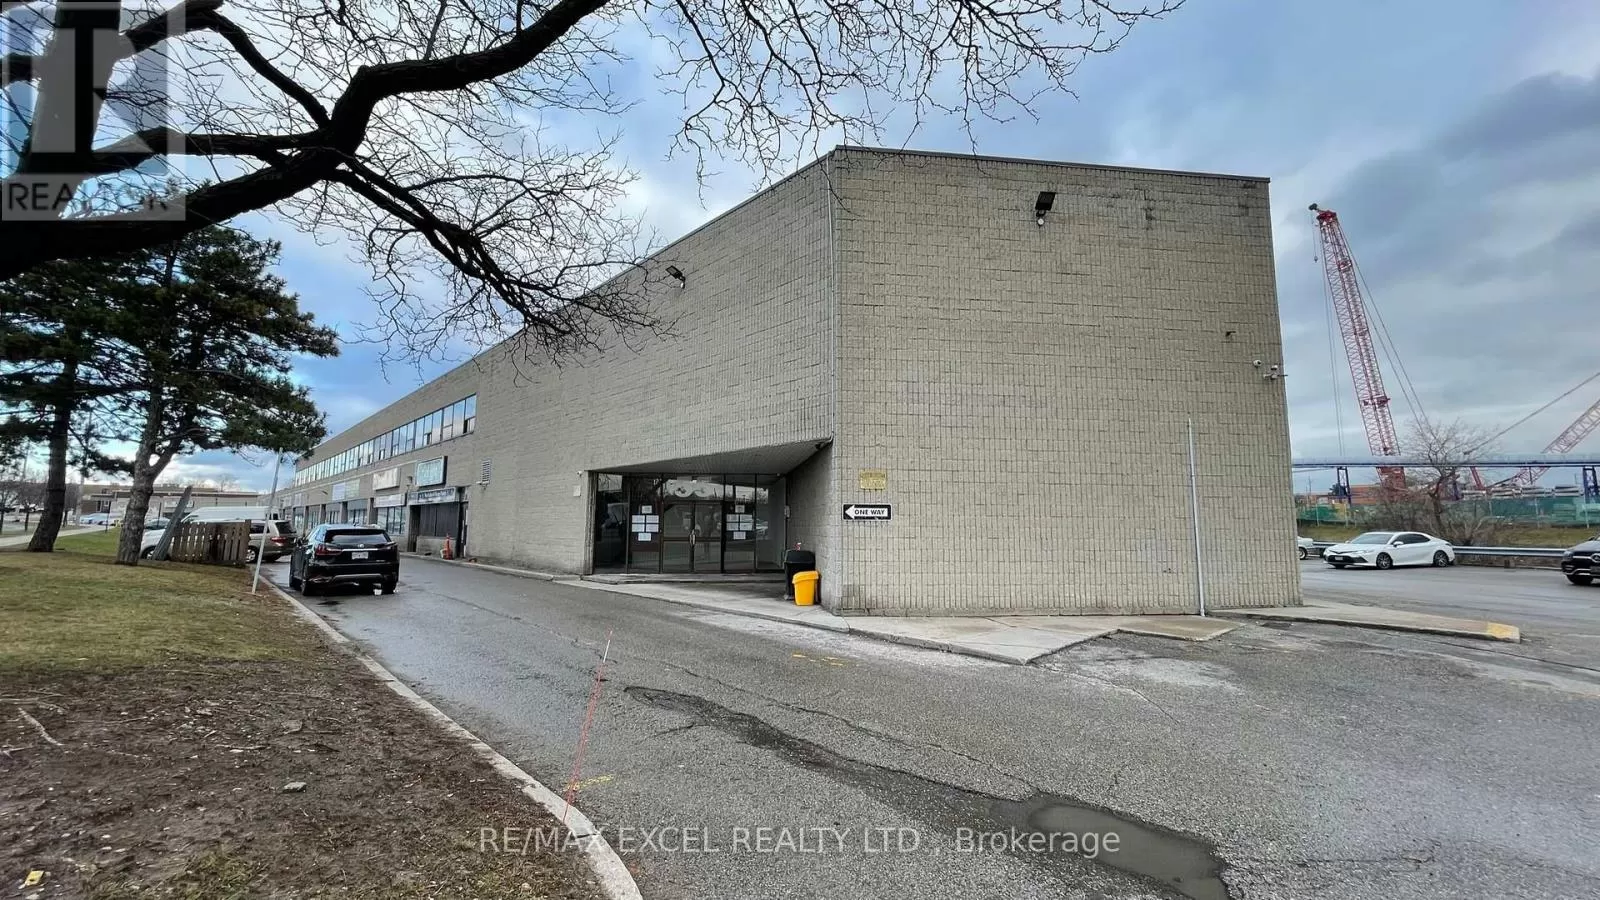 Offices for rent: 230i - 55 Nugget Avenue, Toronto, Ontario M1S 3L1